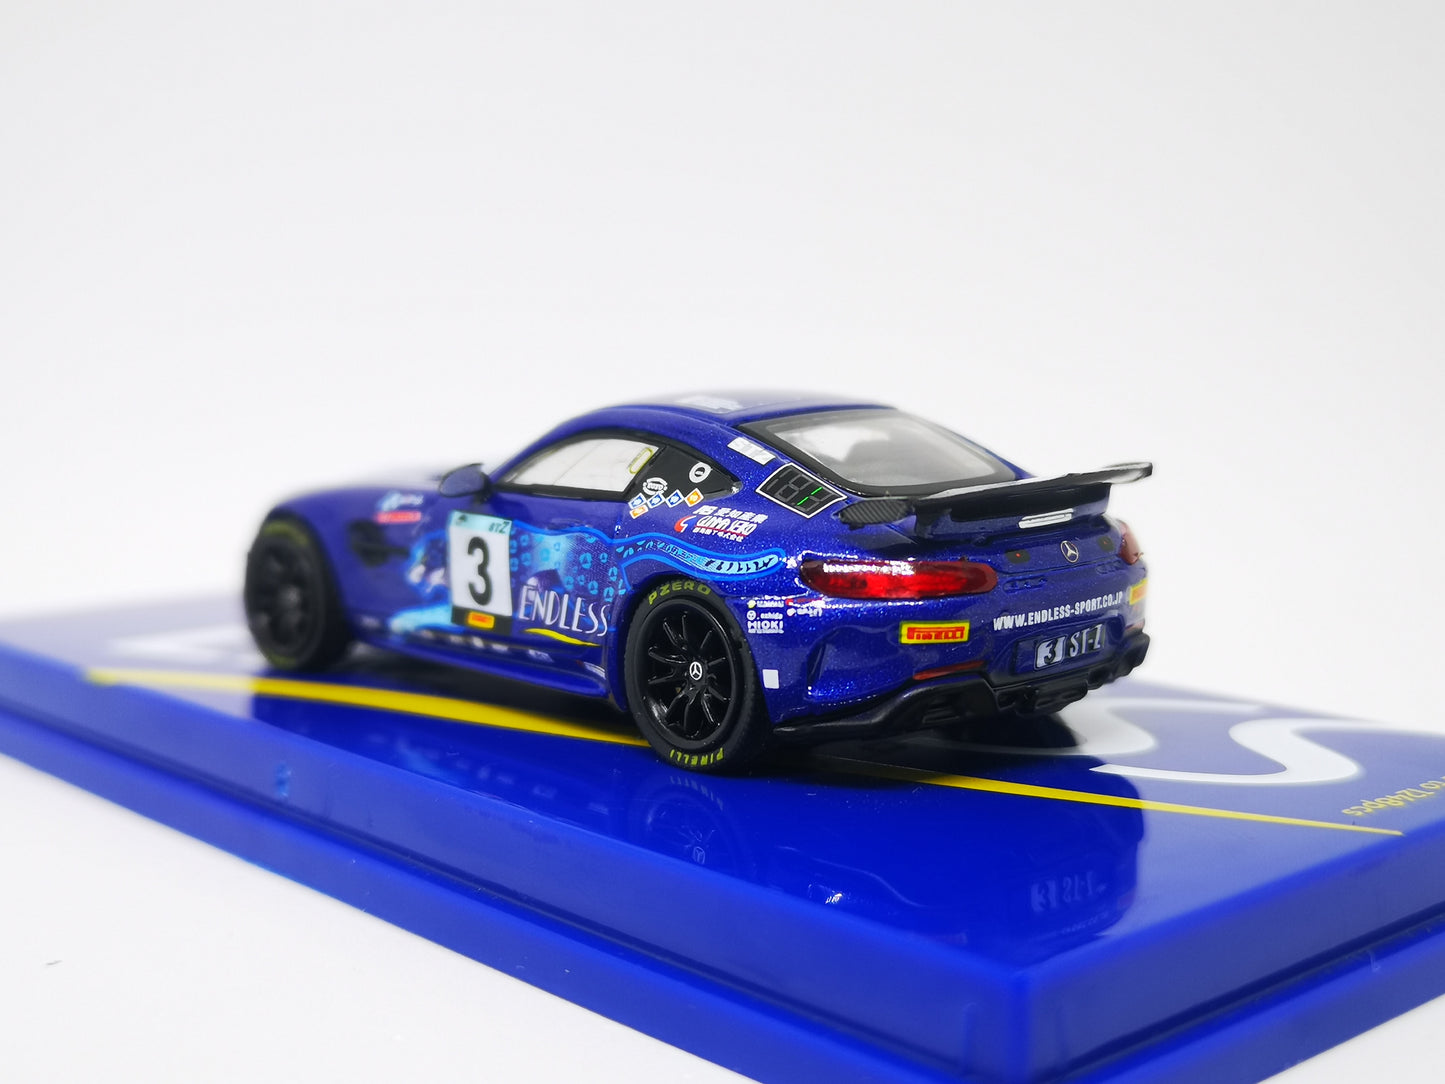 Tarmac Works Scale 1:64
Mercedes Benz AMG GT4
Super Taikyu Series 2019
Endless Sport